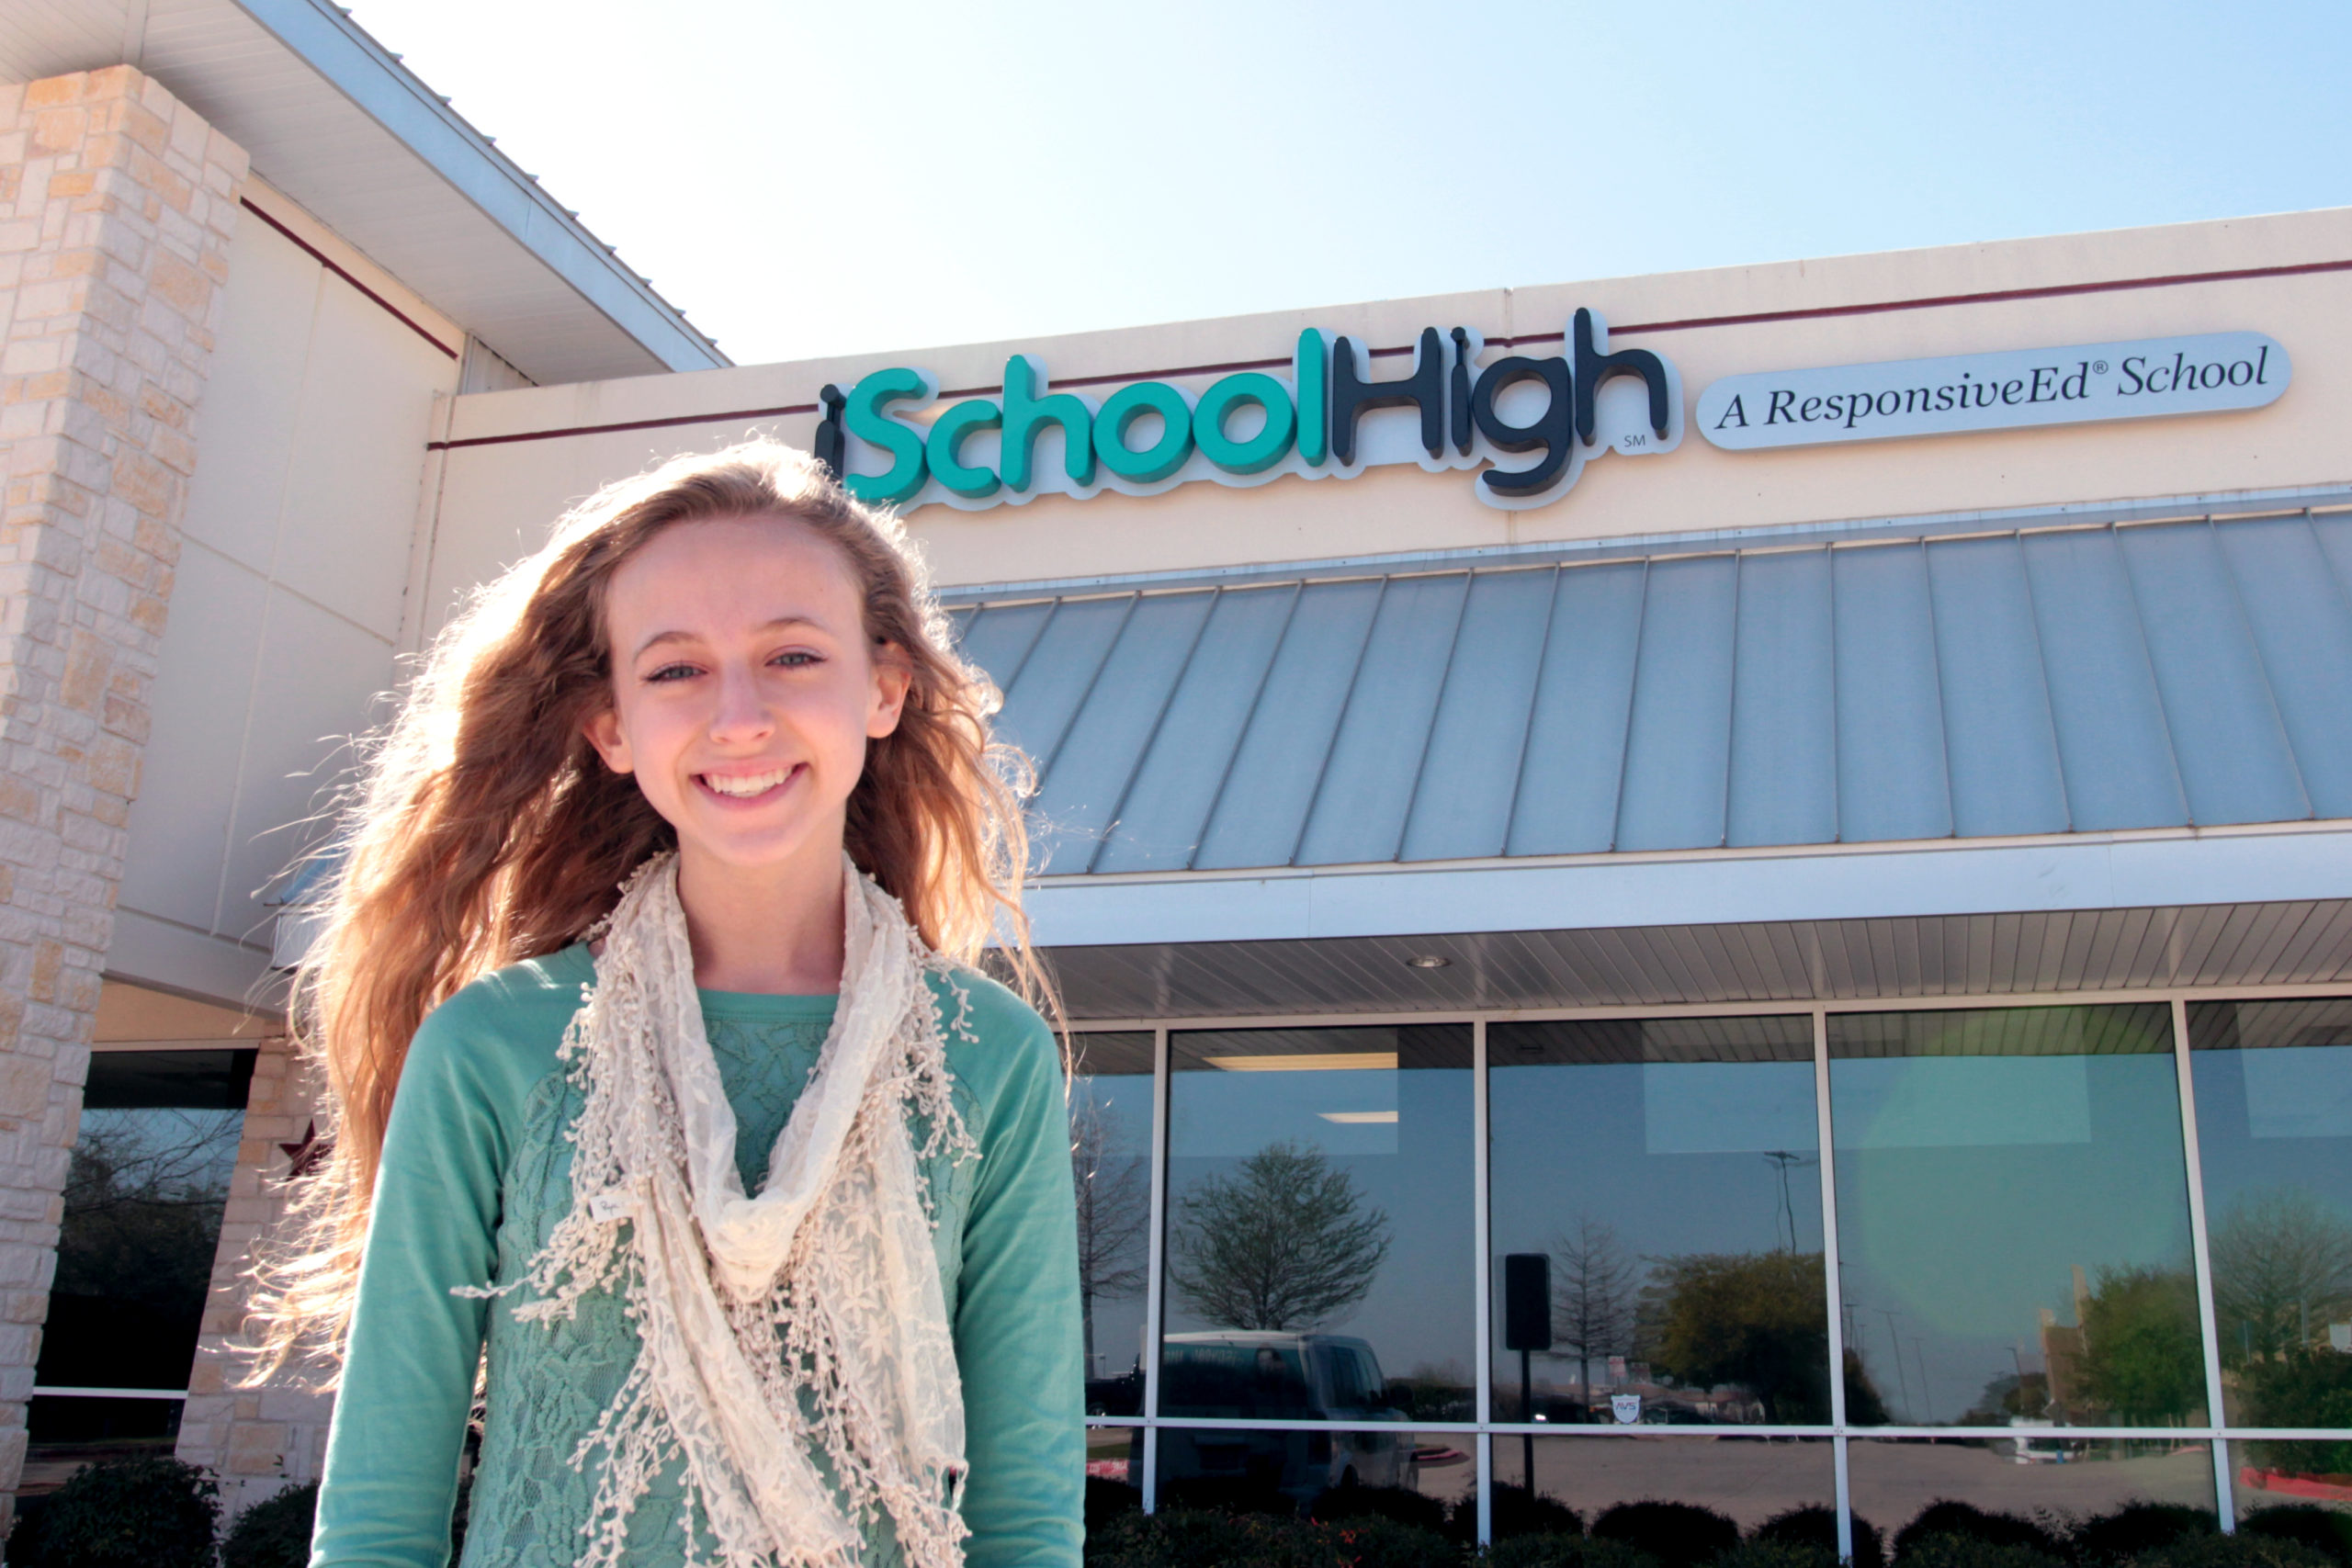 iSchool High Student Makes a Difference In and Out of School